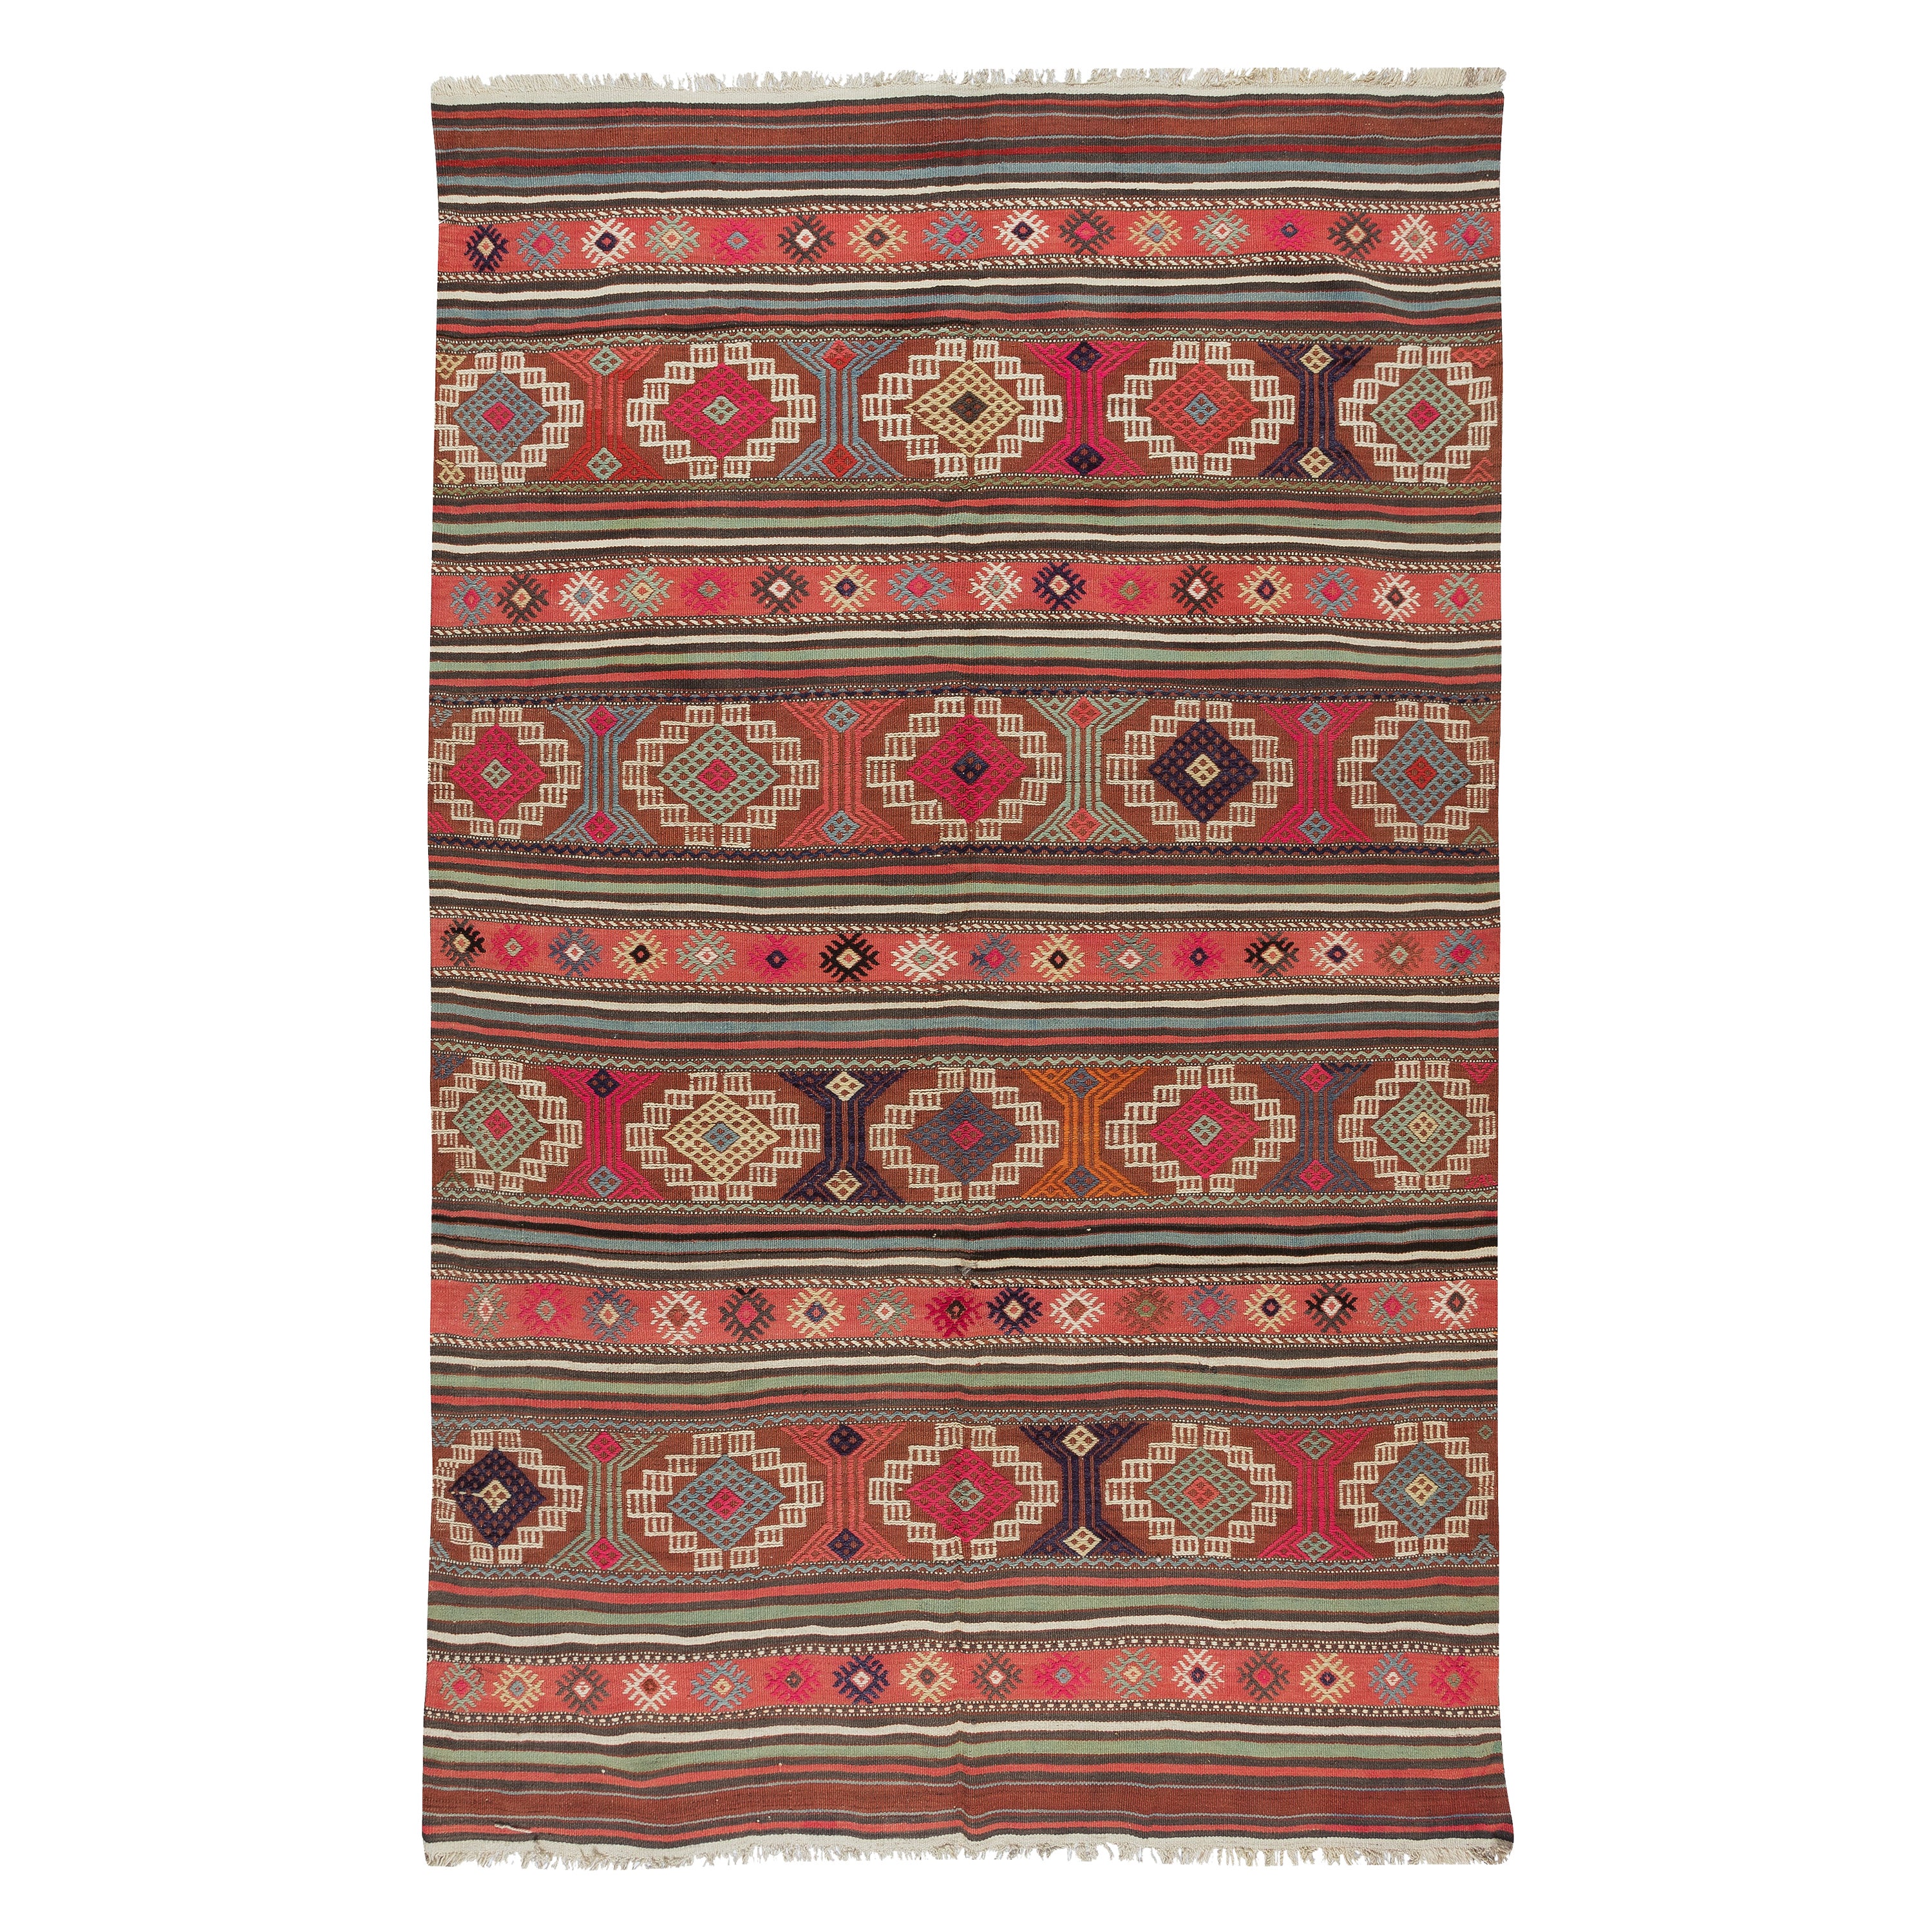 5x8 Ft Multicolor Handmade Wool Kilim Rug From Central Anatolia, Turkey, 1970s For Sale